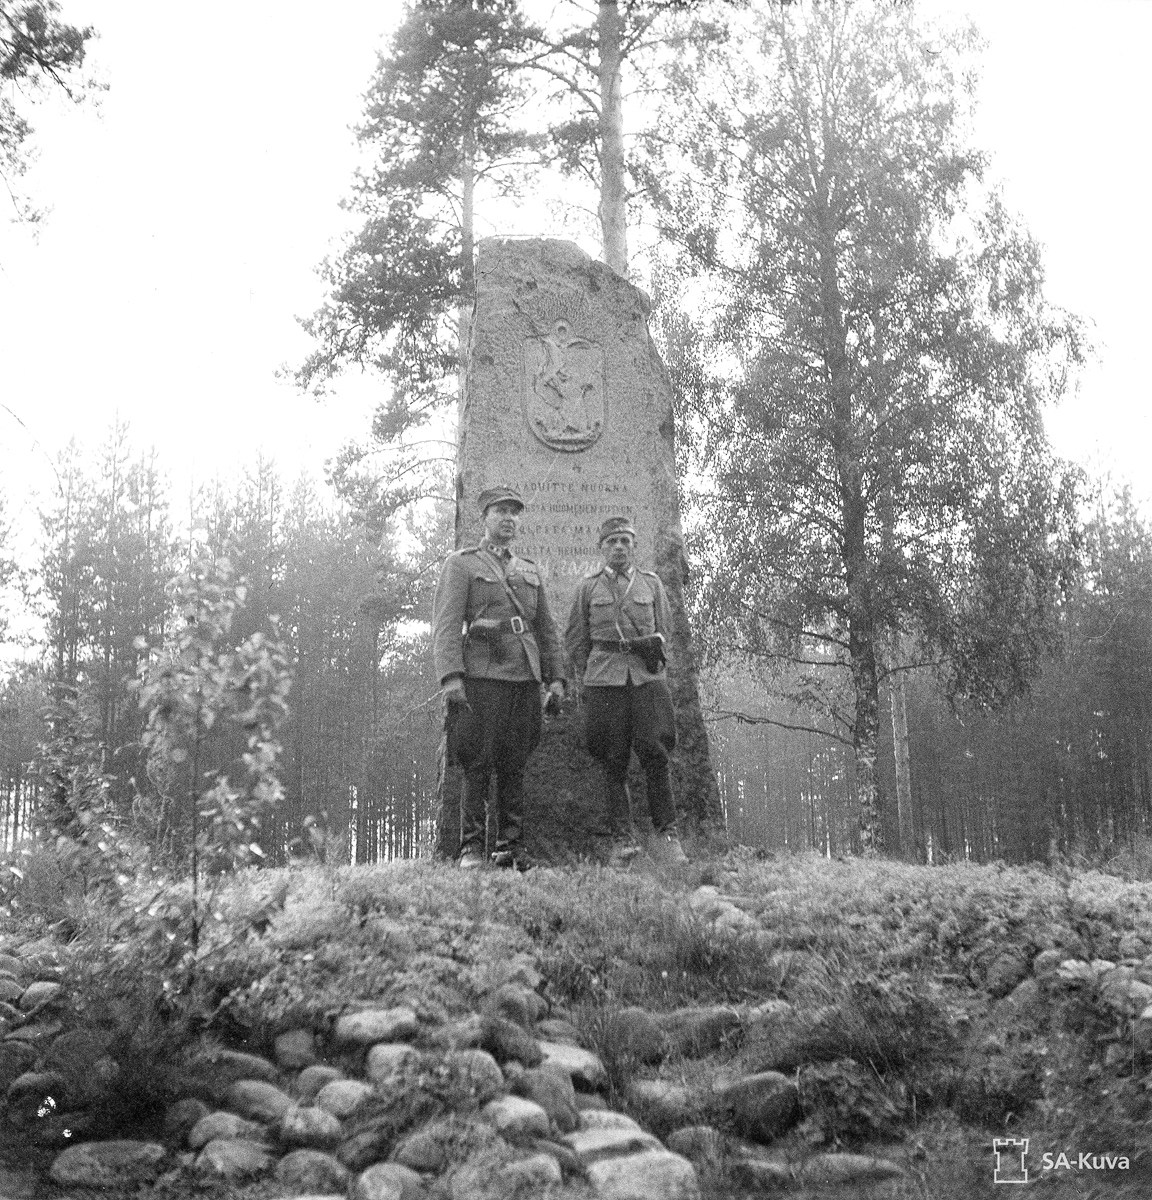 July 21, 1941. Tulema. Major General Paavo Talvela and Colonel Ruben Lagus near the Monument to the Fallen in Olonets expedition